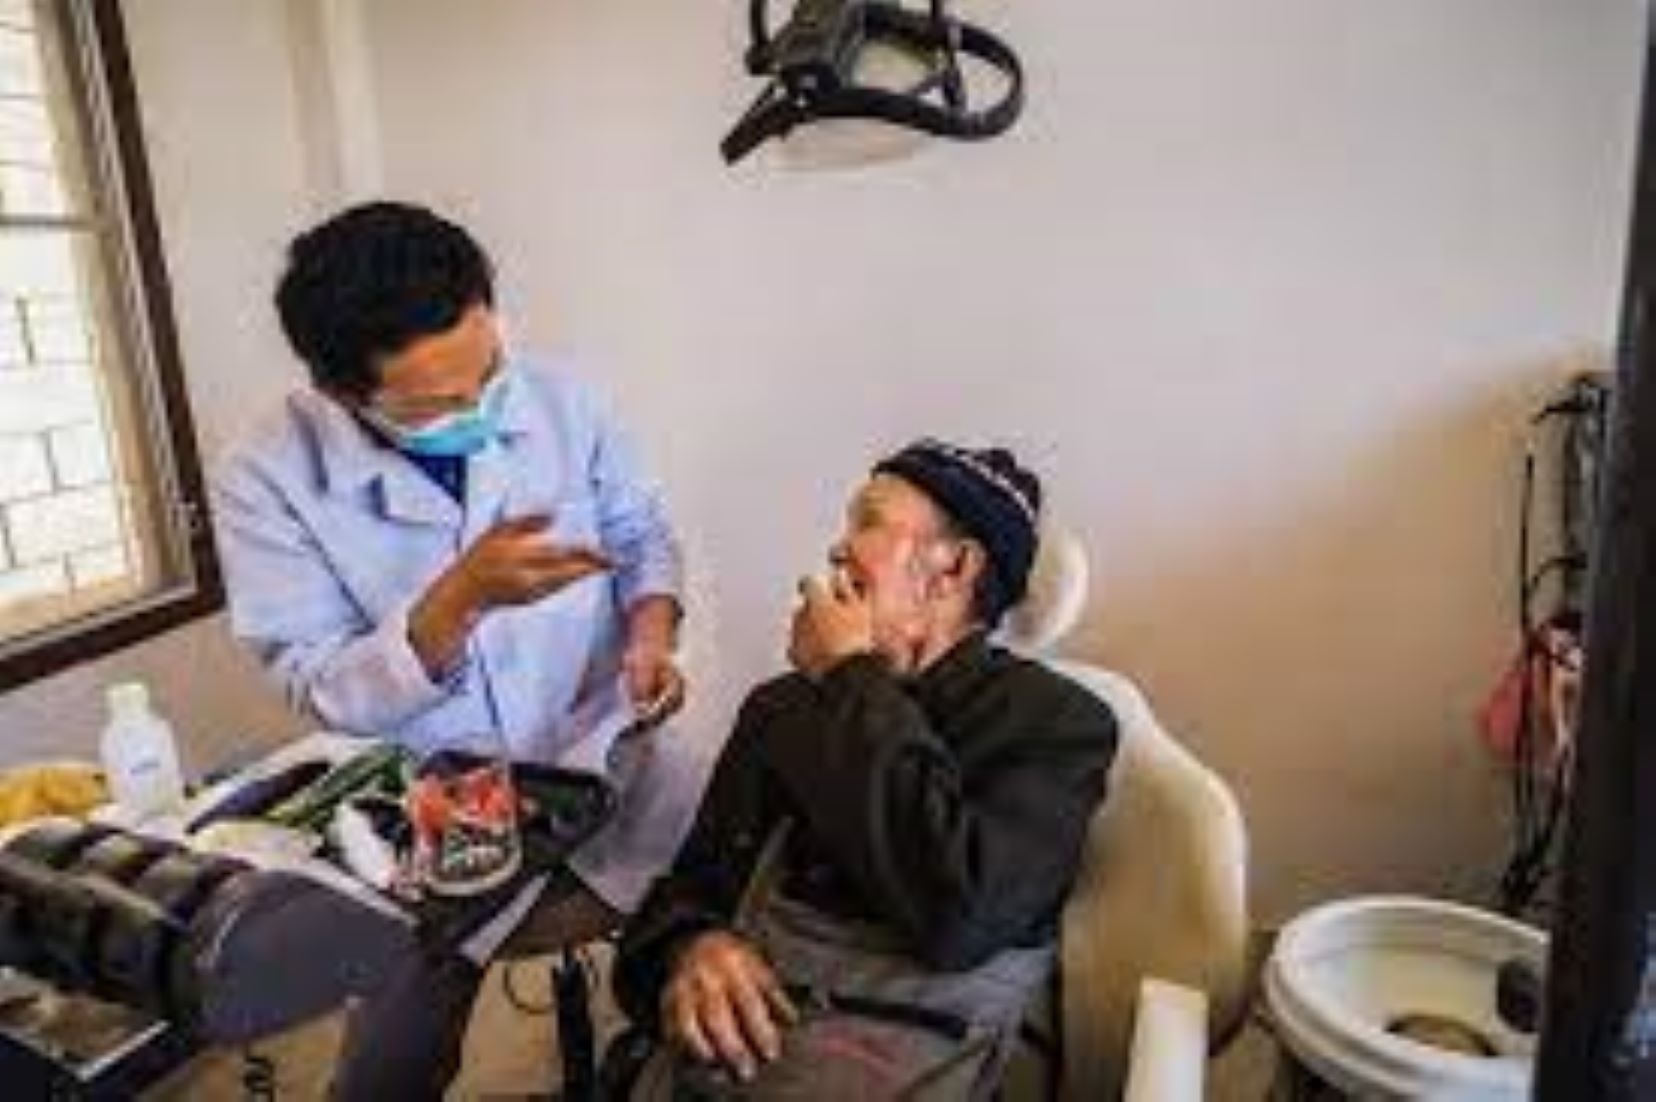 Oral Diseases Affect Over 800 Million People In Western Pacific: WHO